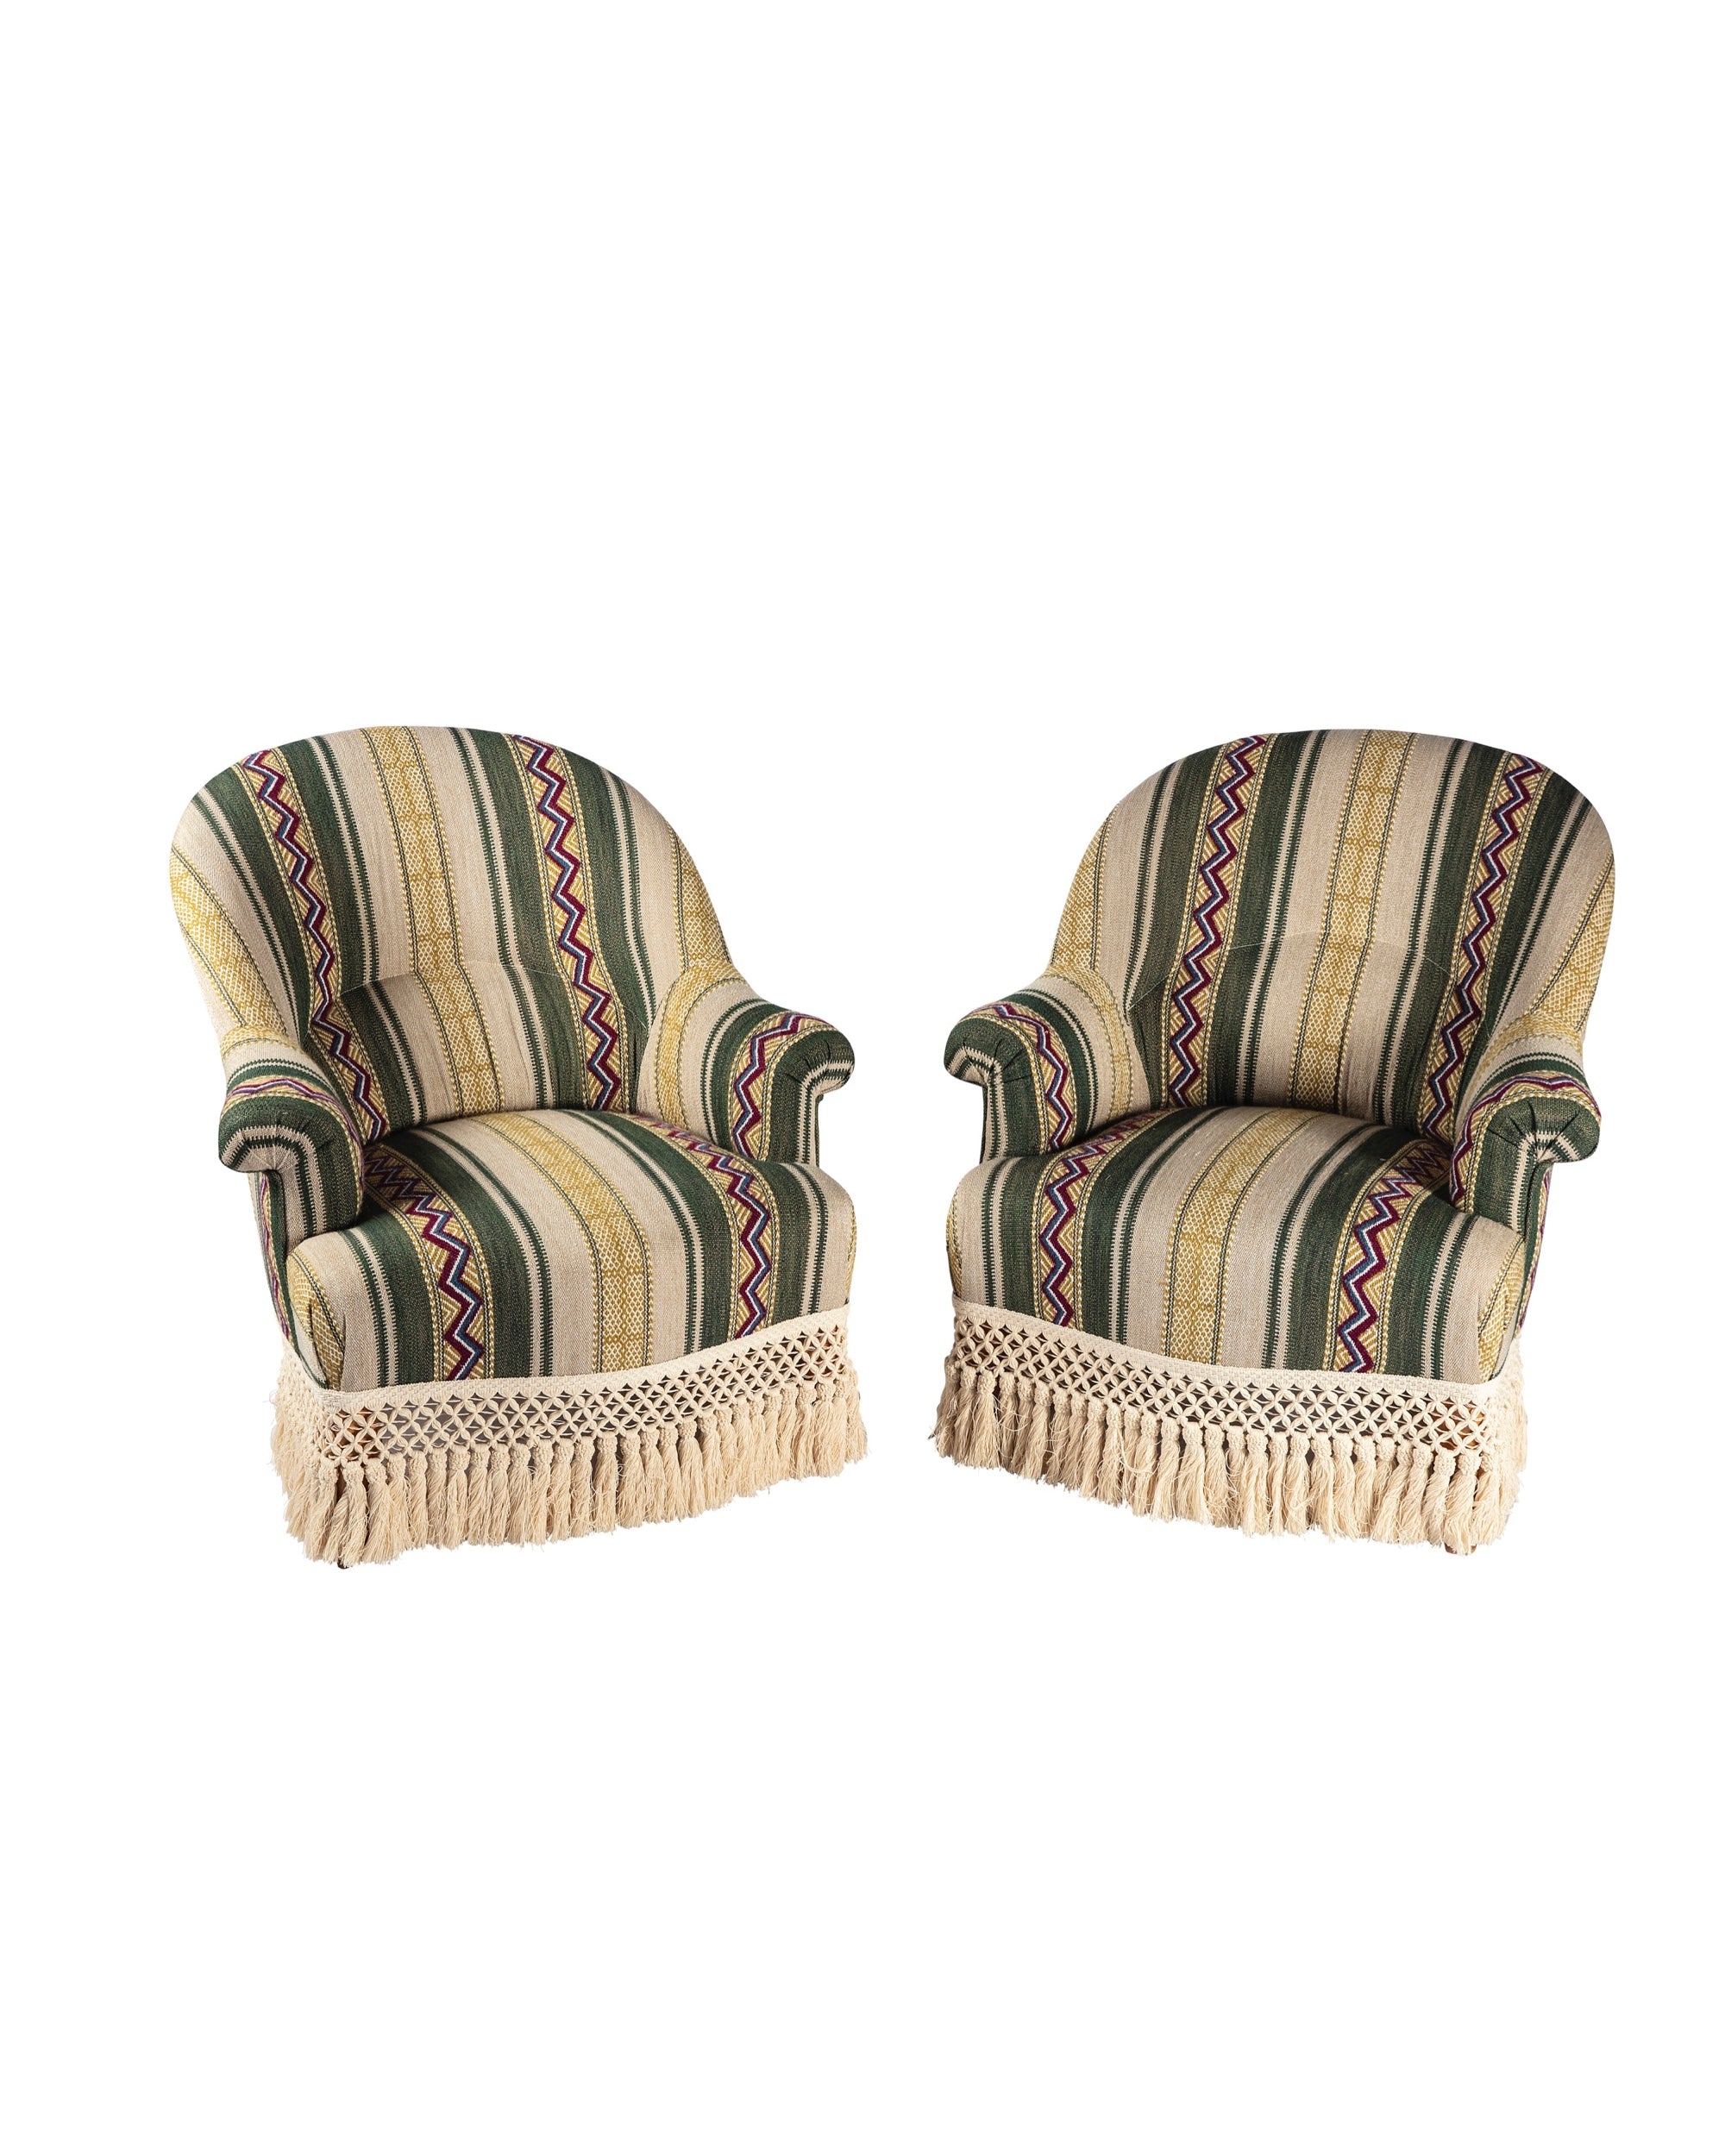 Pair of upholstered armchairs